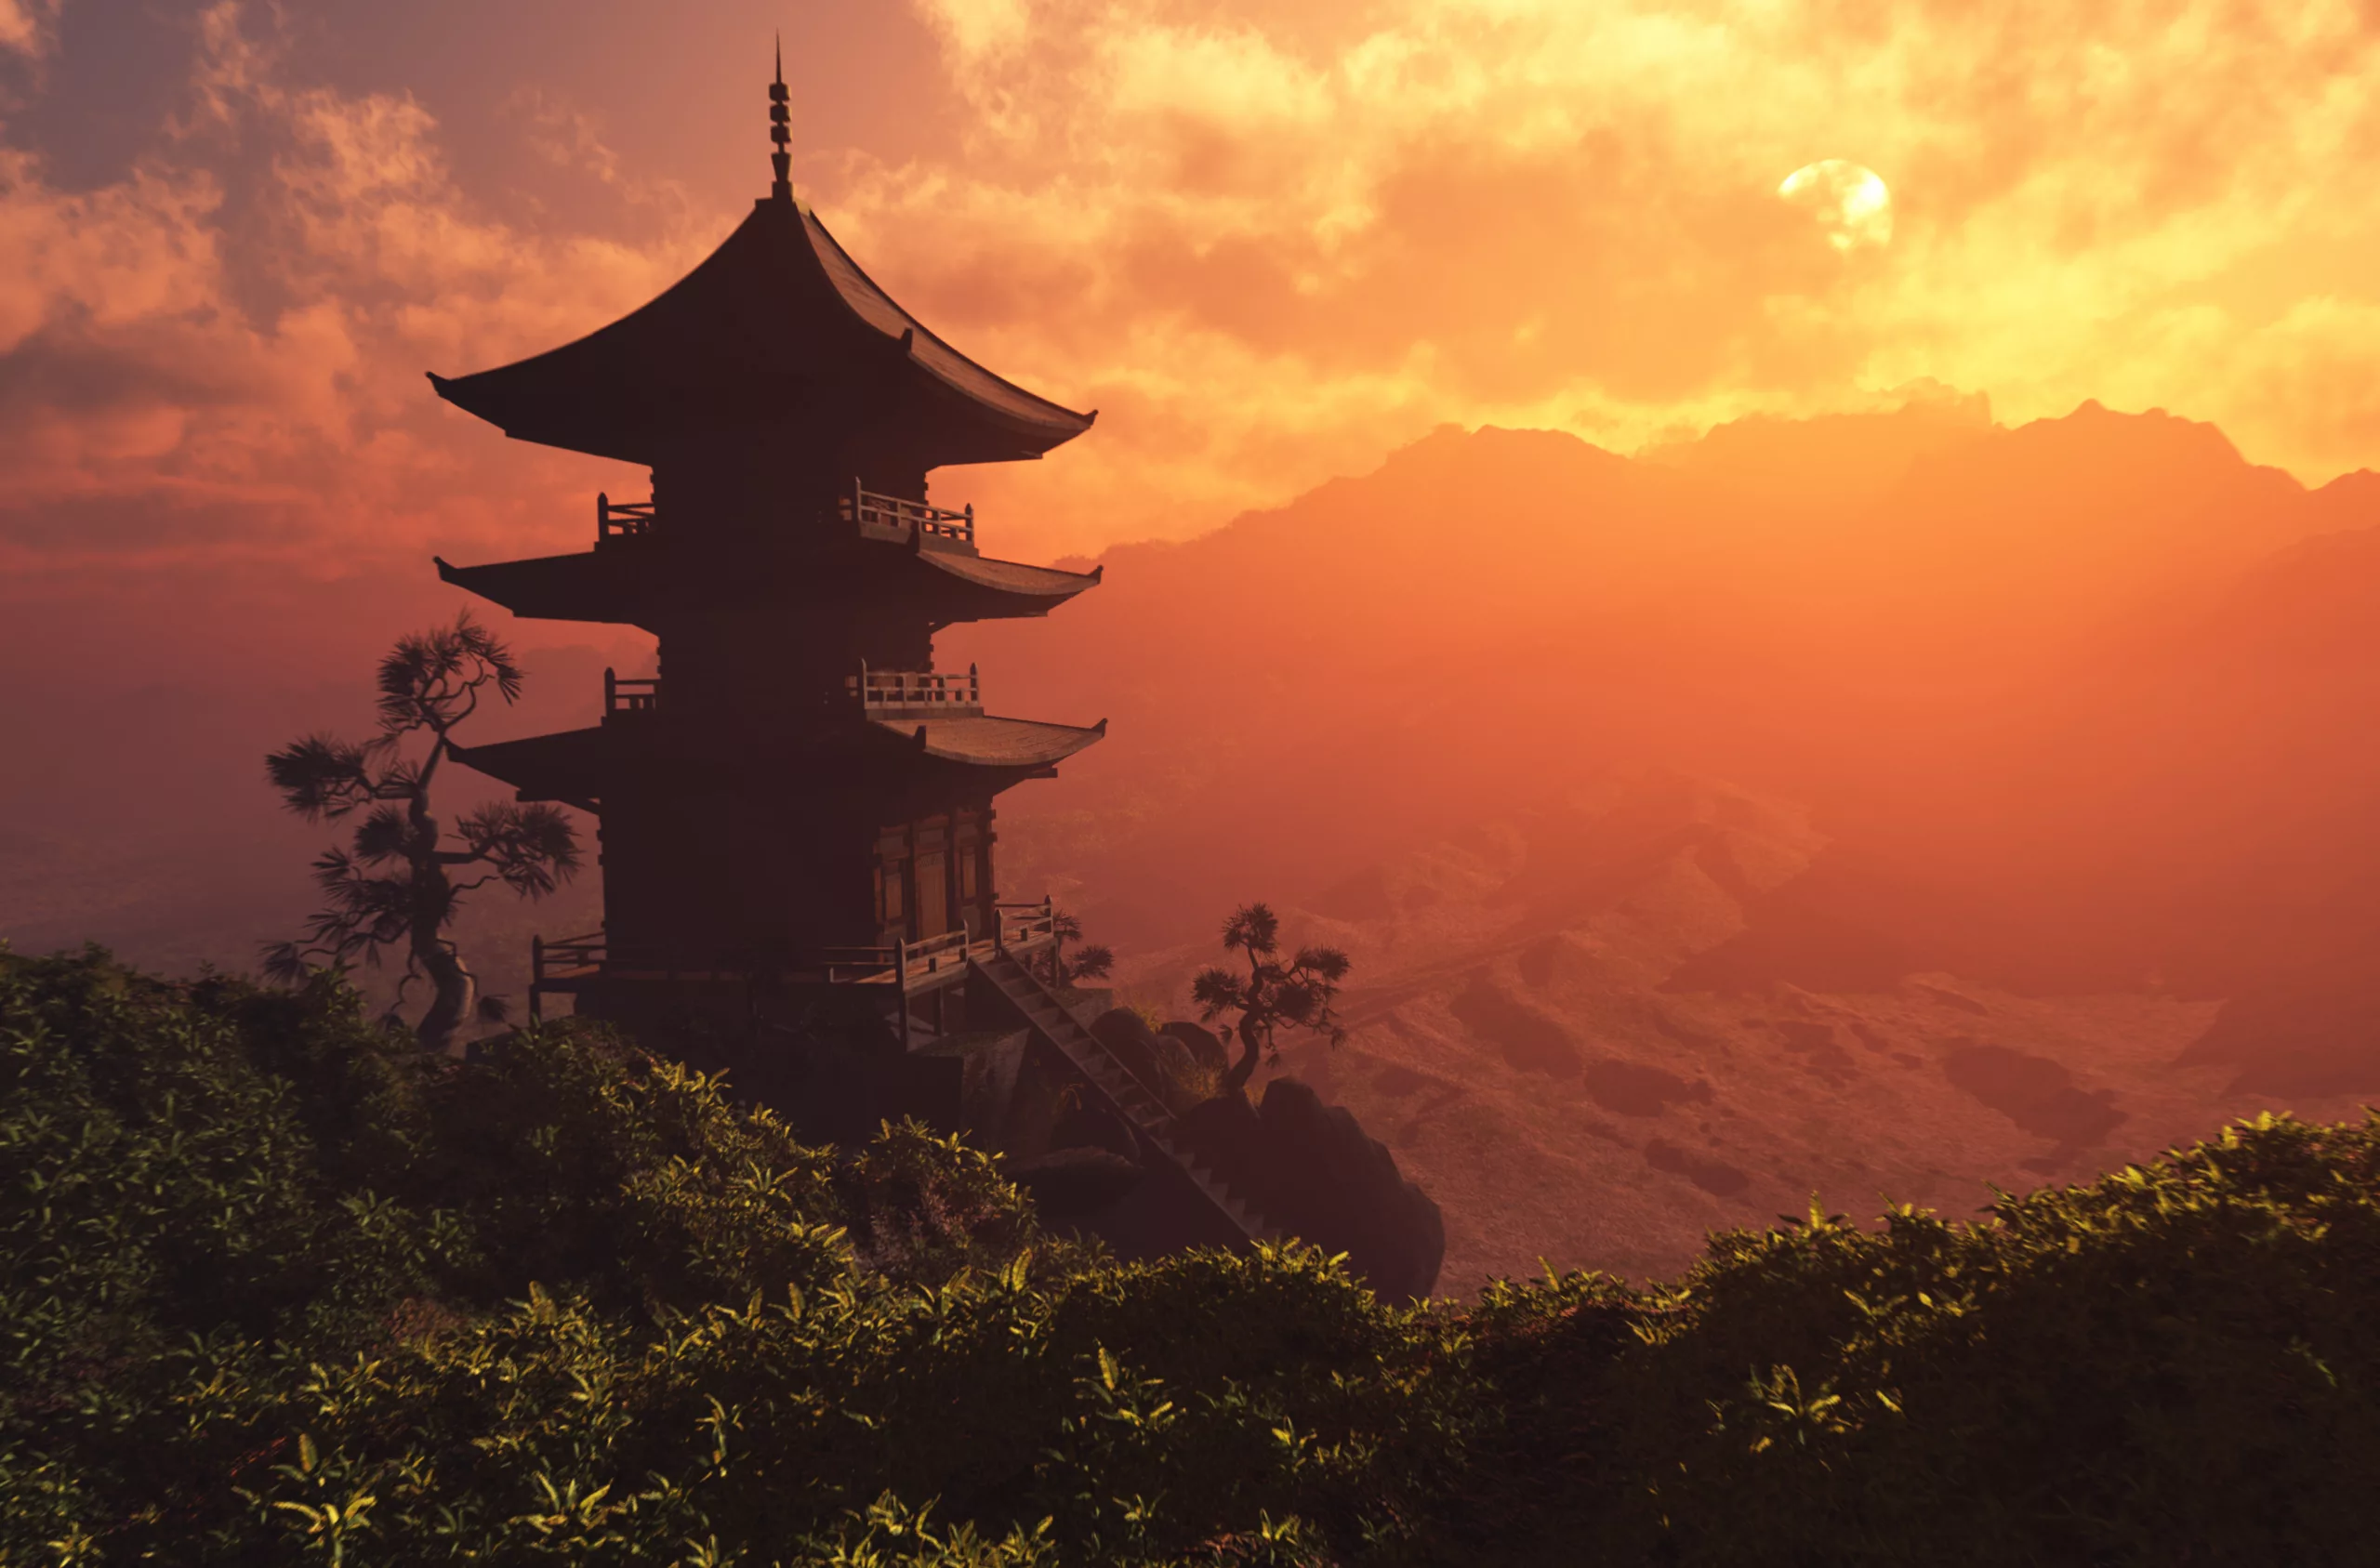 A picture of an Asian building overlooking a valley at sunset